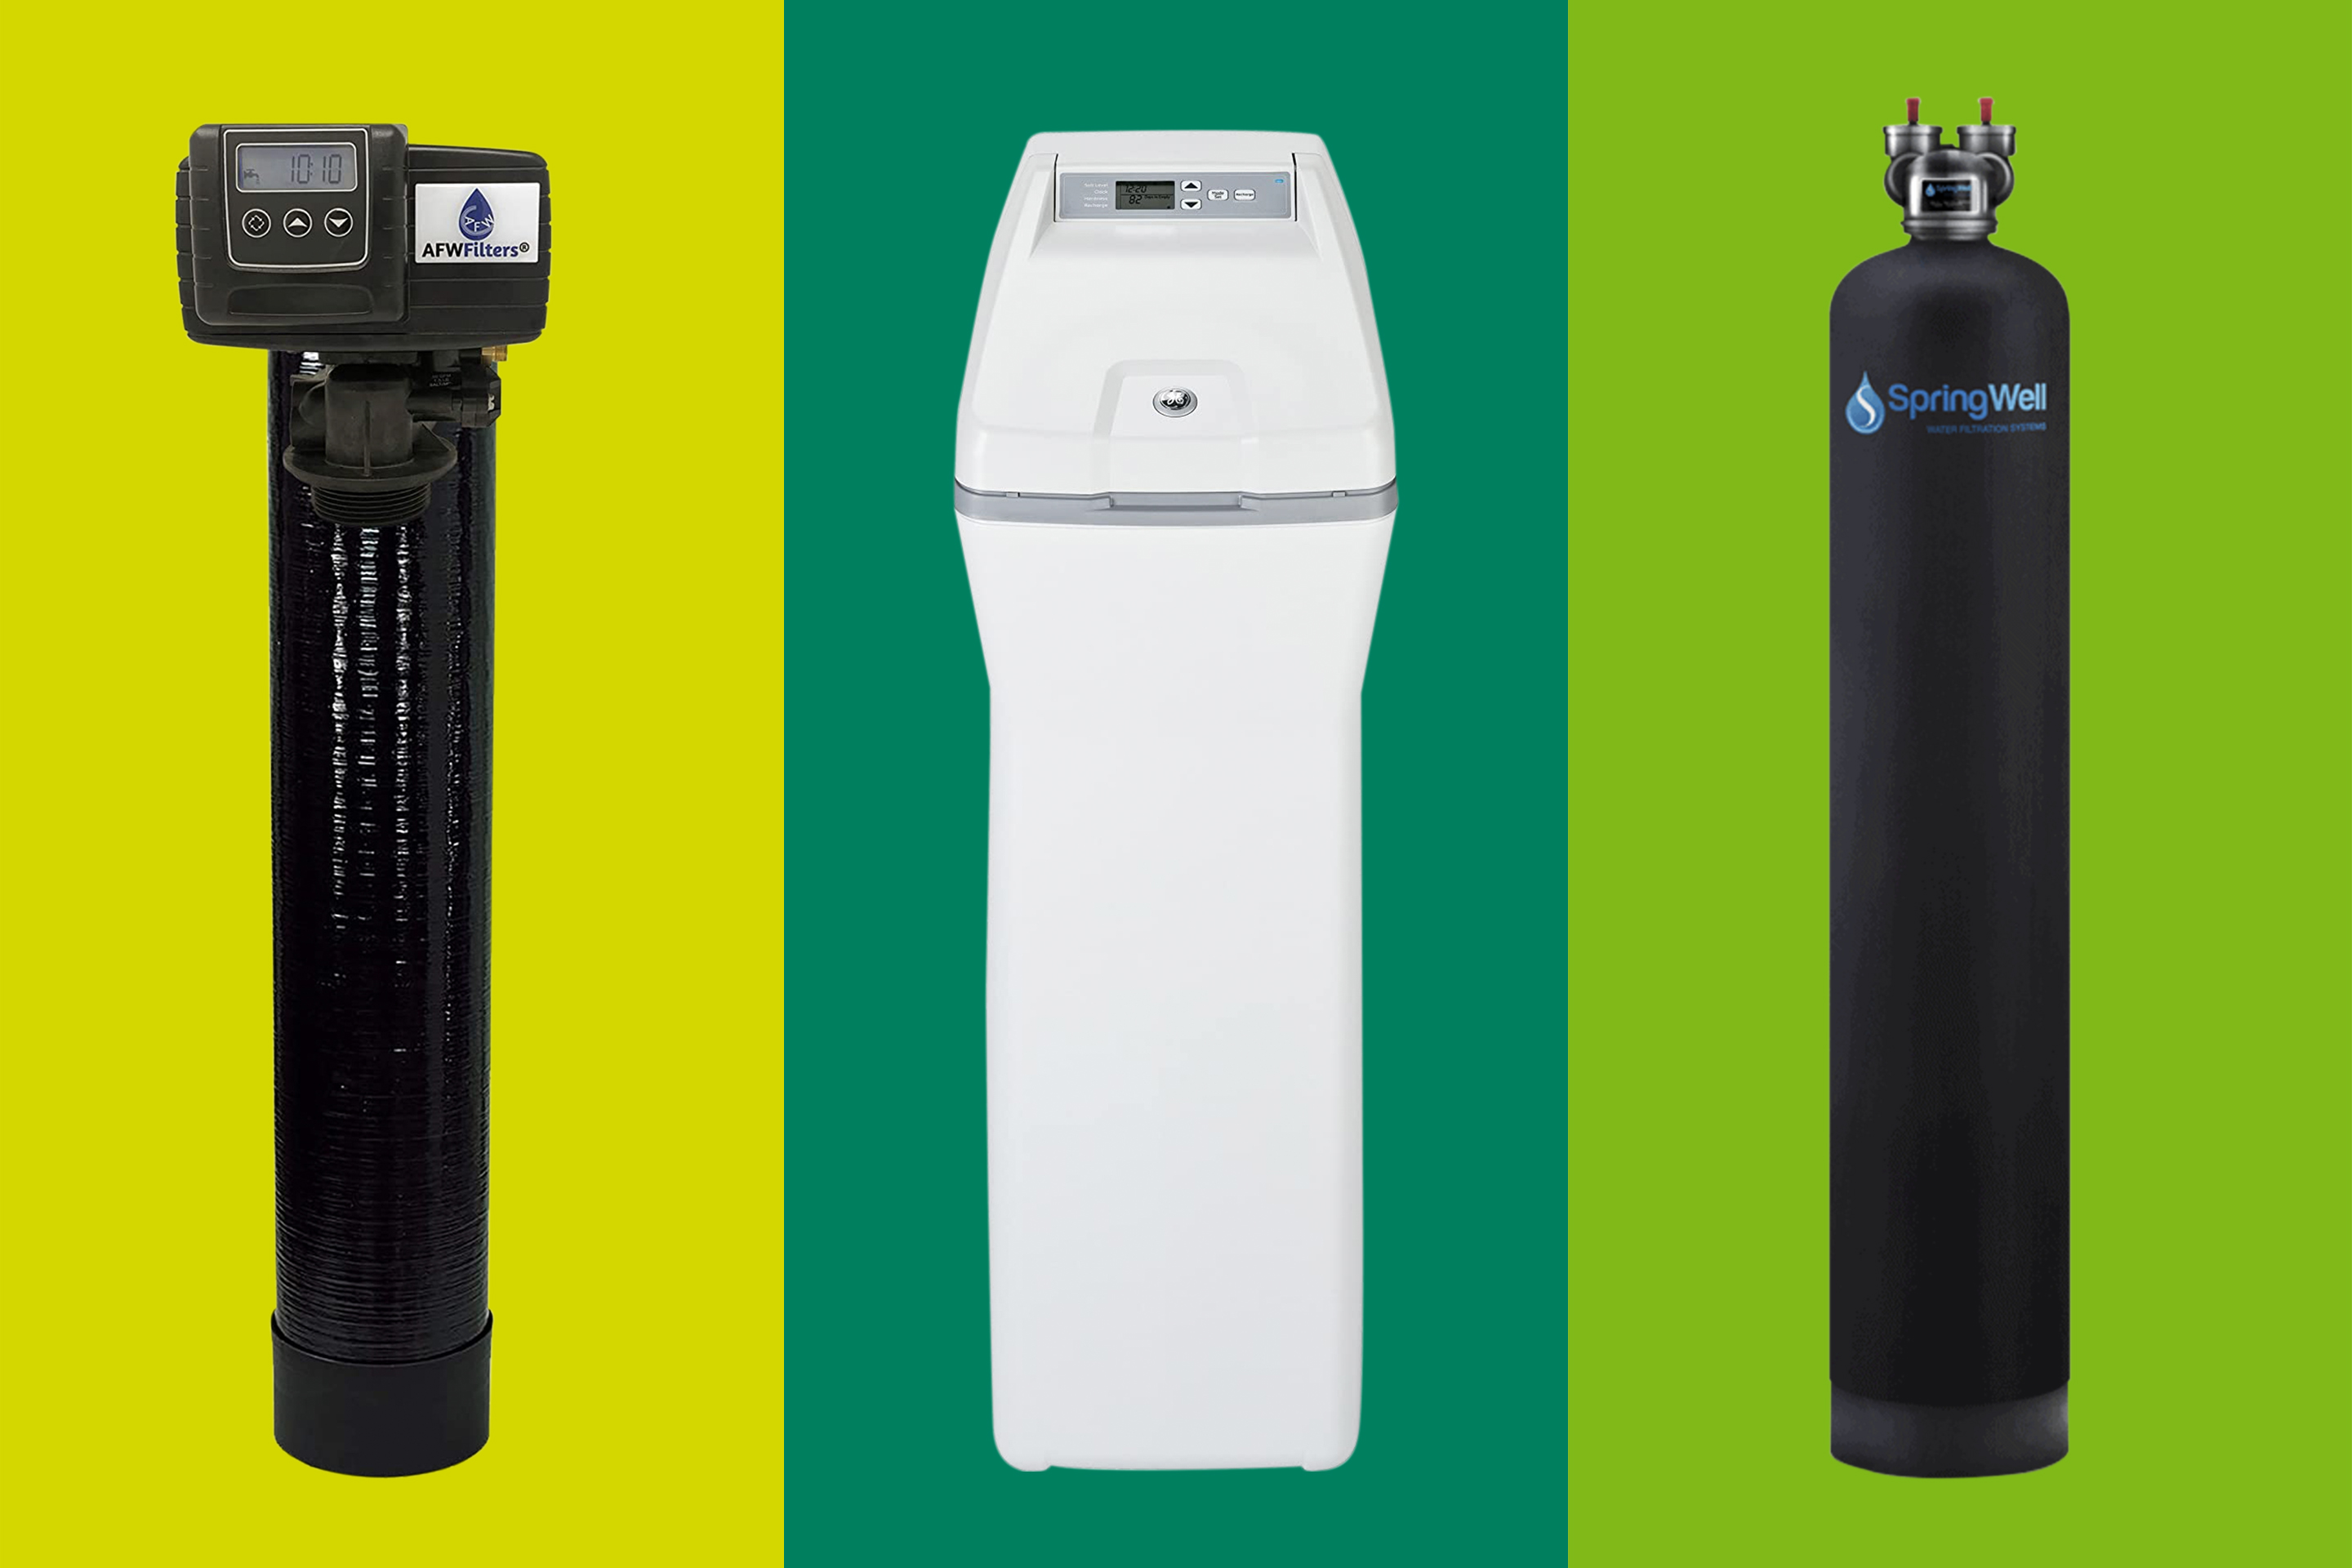 The Best Water Softeners for Your Money